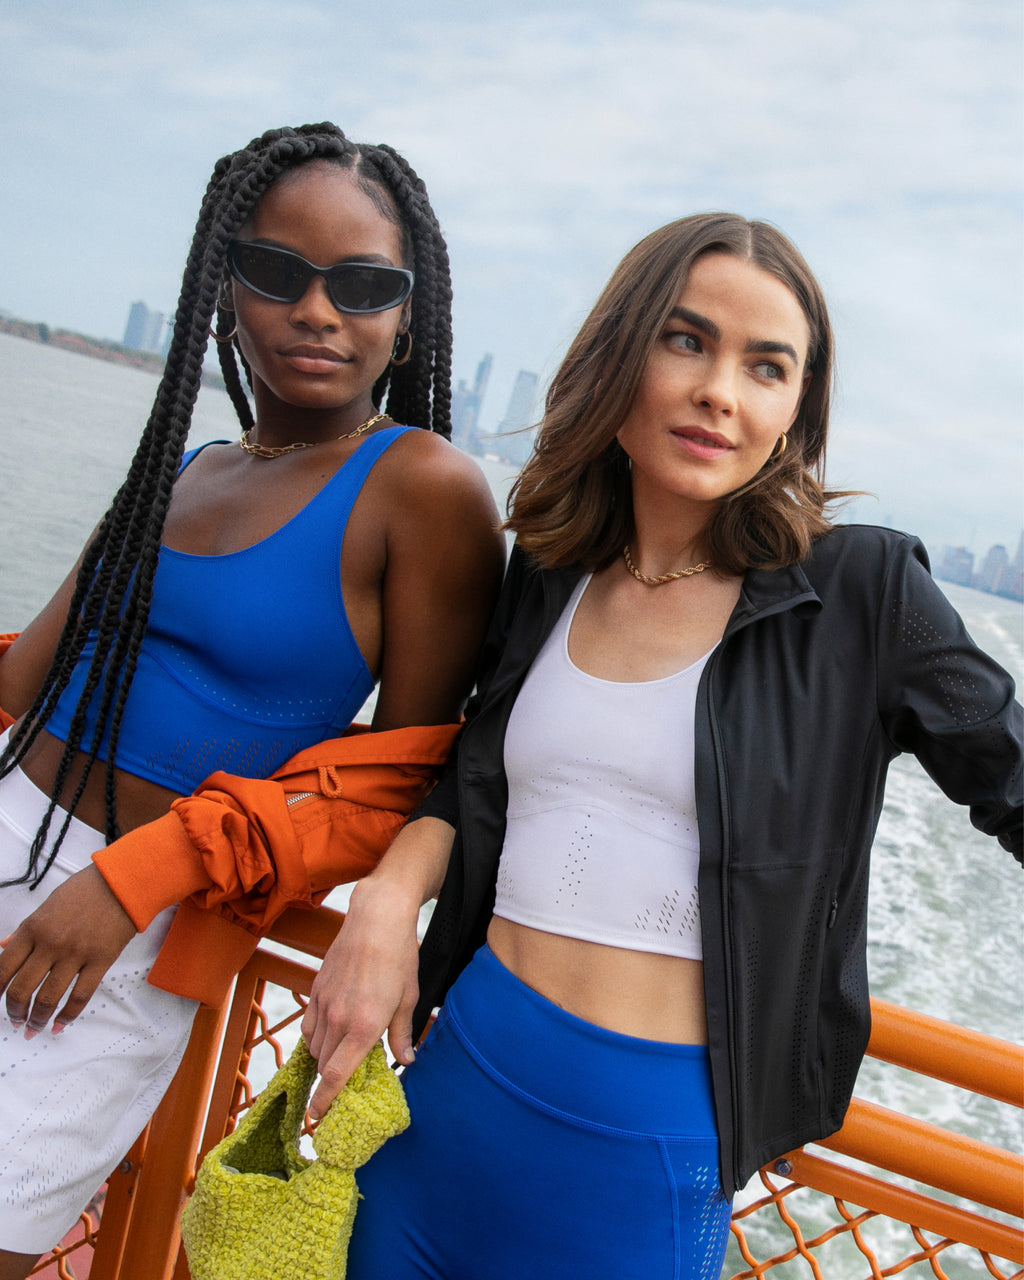 Models wearing the Lasercut collection from BANDIER on the ferry with the New York skyline behind them